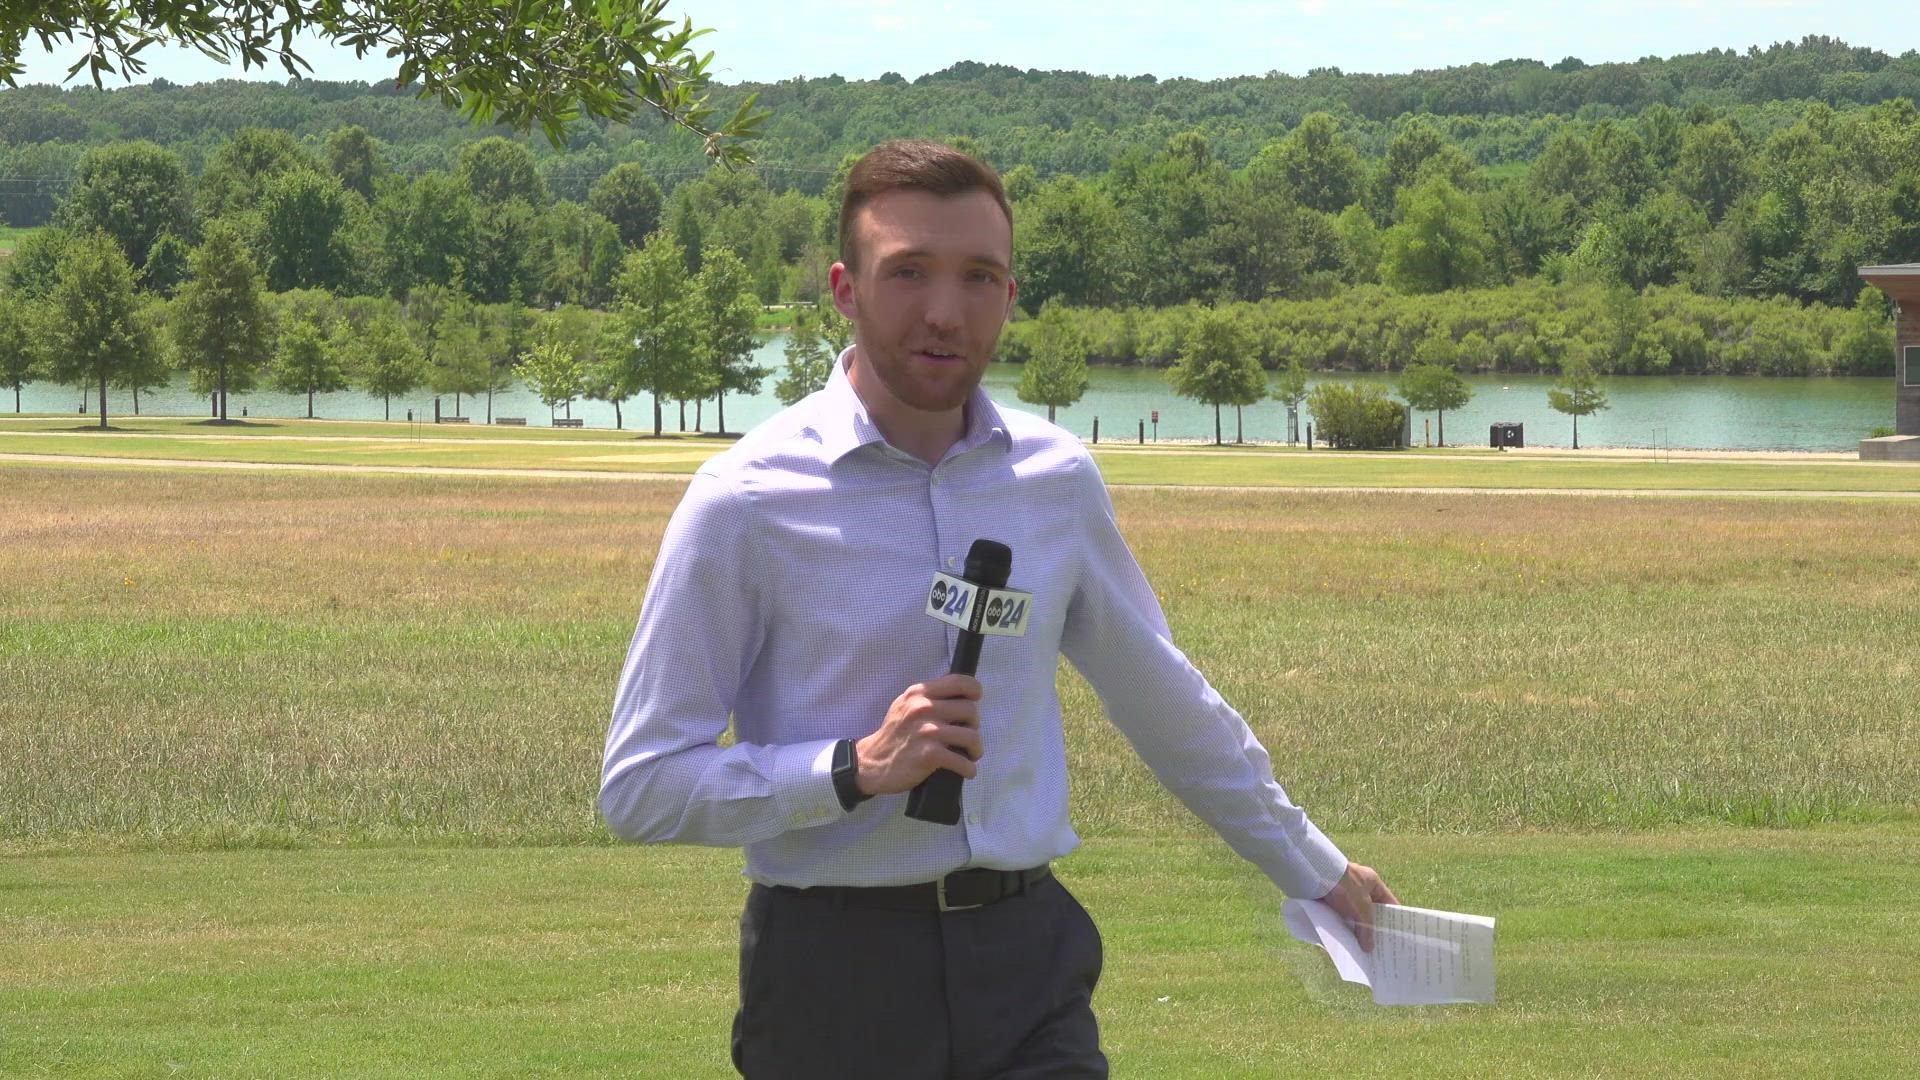 Meteorologist Trevor Birchett has details on how our recent dry stretch of weather could lead to a greater fire danger in the Memphis area.